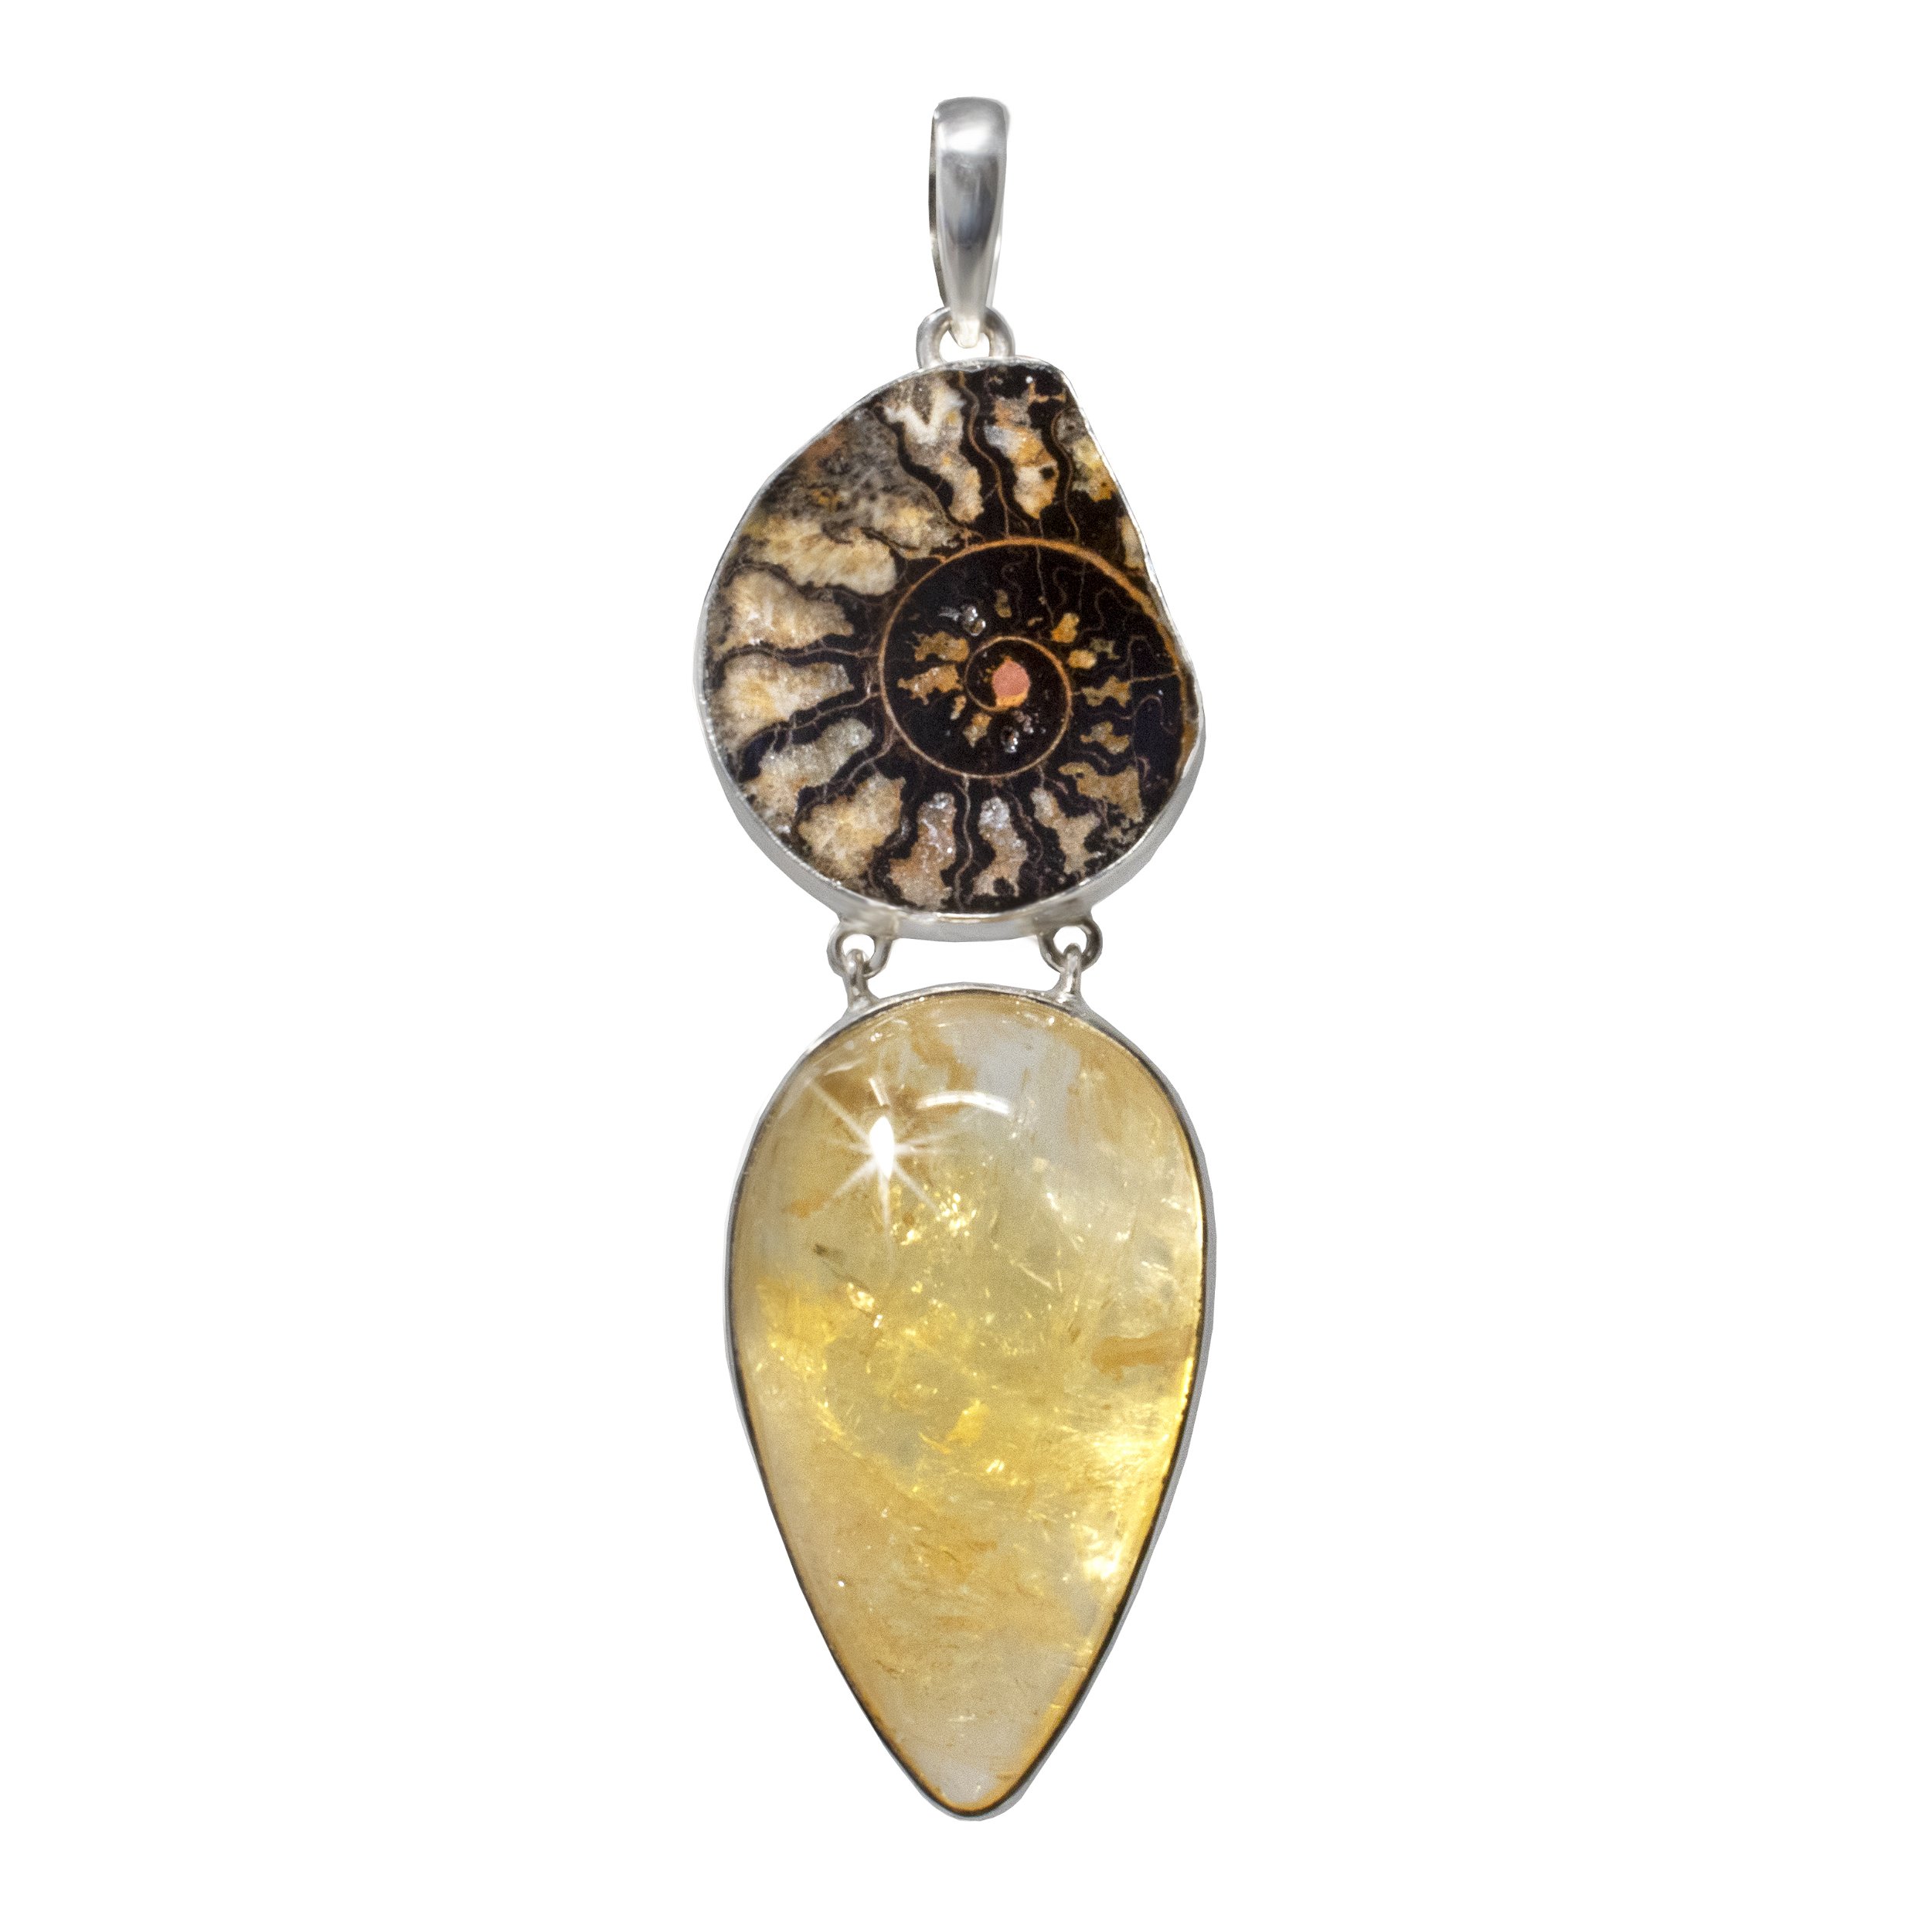 Citrine Pendant - Cambered Reverse Pear Cabochon Paired With Ammonite Slice With Deep Mocha & Beige Sutures With Silver Bezels